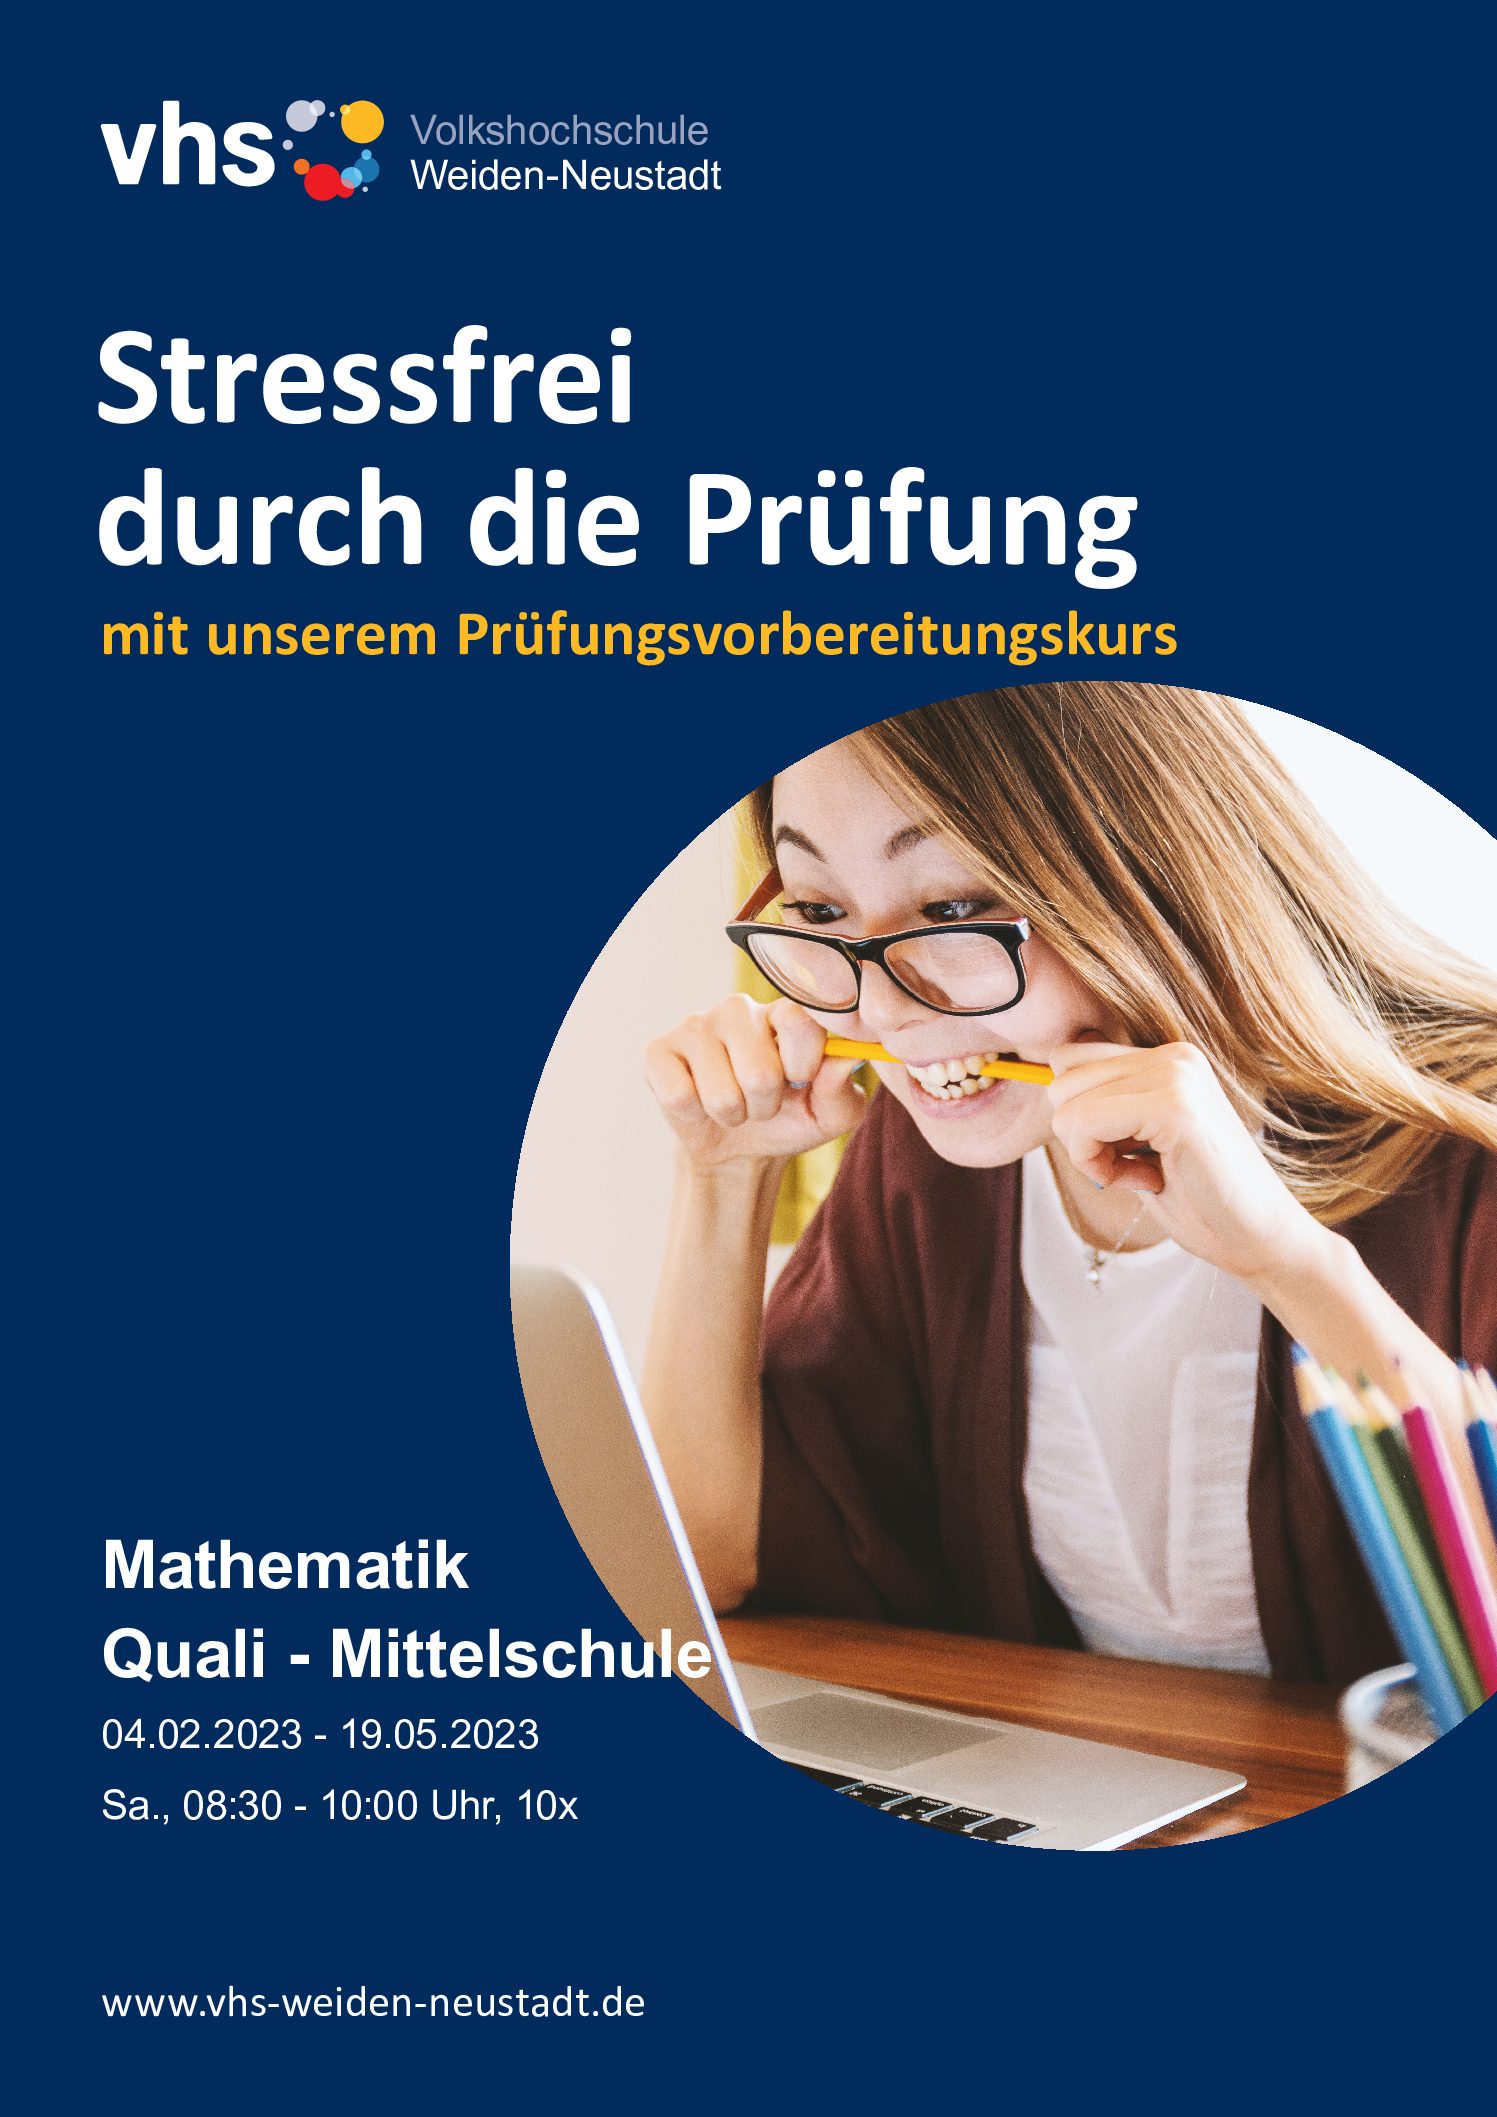 You are currently viewing Stressfrei durch die Prüfung